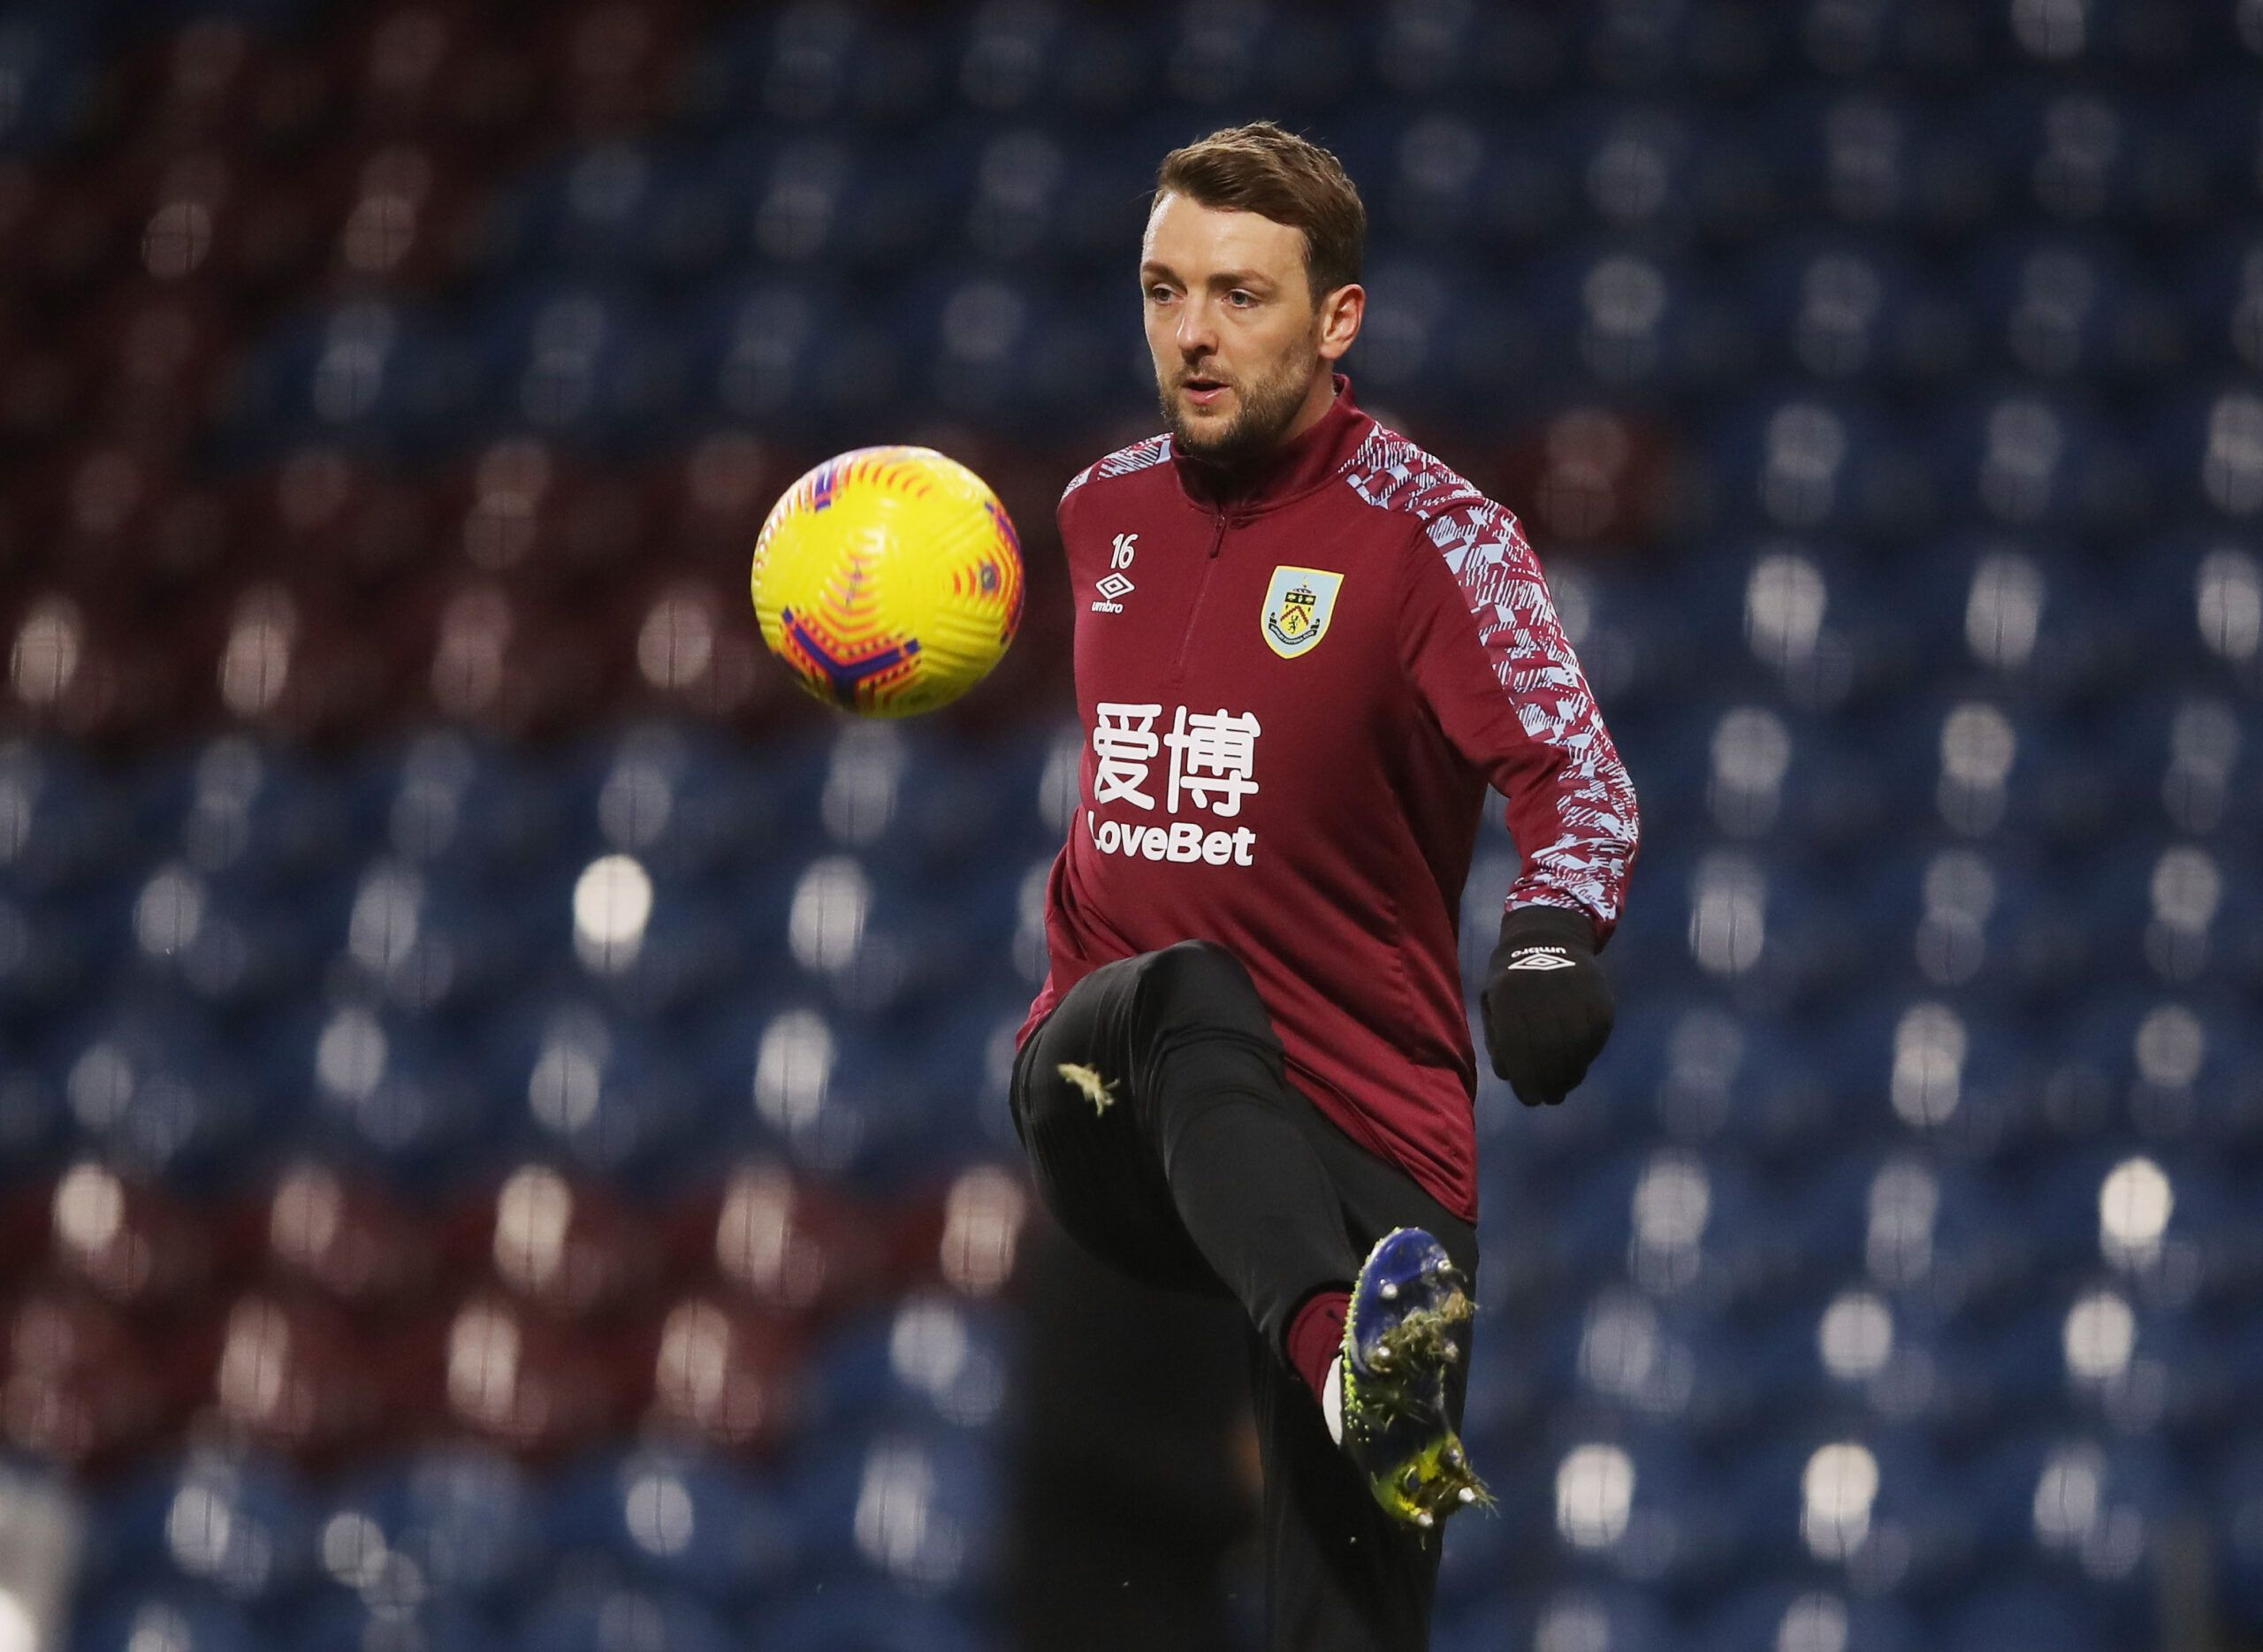 Soccer Football - Premier League - Burnley v Aston Villa - Turf Moor, Burnley, Britain - January 27, 2021 Burnley's Dale Stephens during the warm up before the match Pool via REUTERS/Molly Darlington EDITORIAL USE ONLY. No use with unauthorized audio, video, data, fixture lists, club/league logos or 'live' services. Online in-match use limited to 75 images, no video emulation. No use in betting, games or single club /league/player publications.  Please contact your account representative for fur